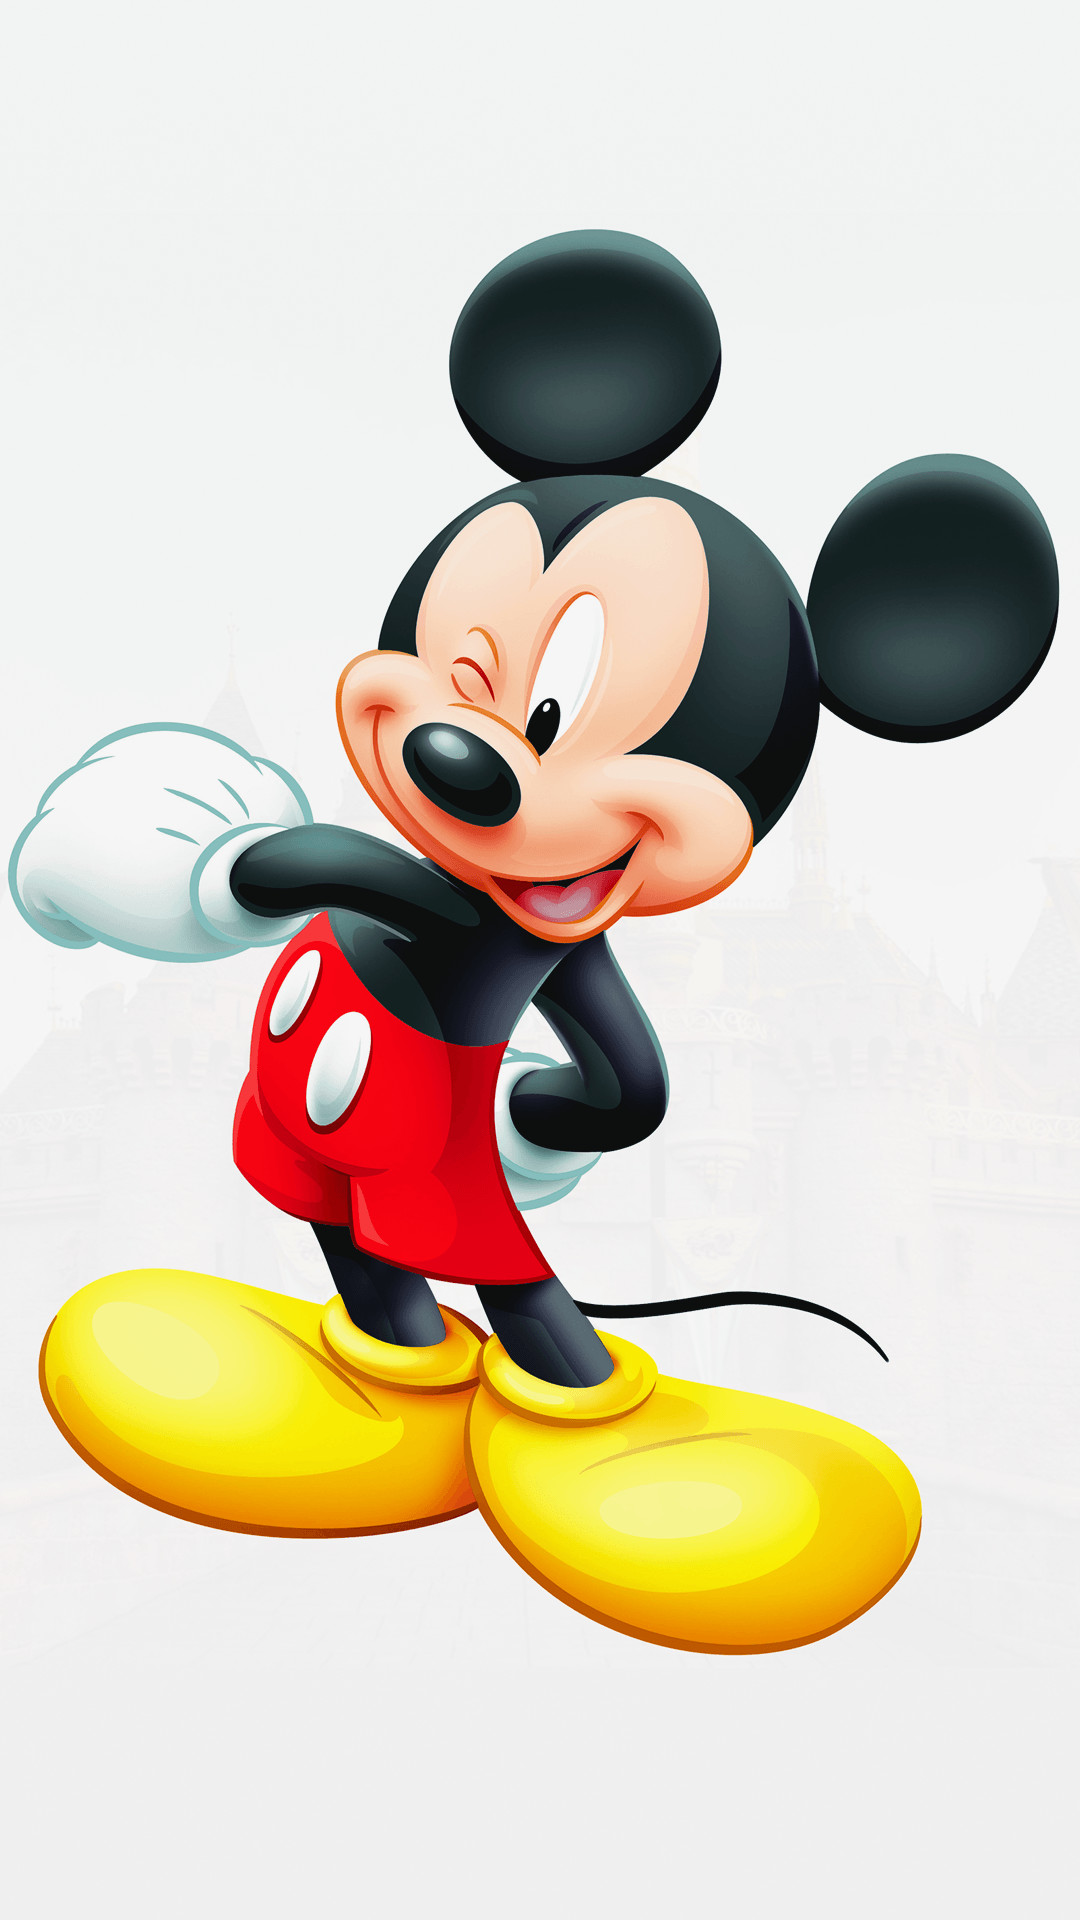 1080x1920 1024x768 Mickey Mouse Wallpaper For Iphone â Best HD Wallpaper">